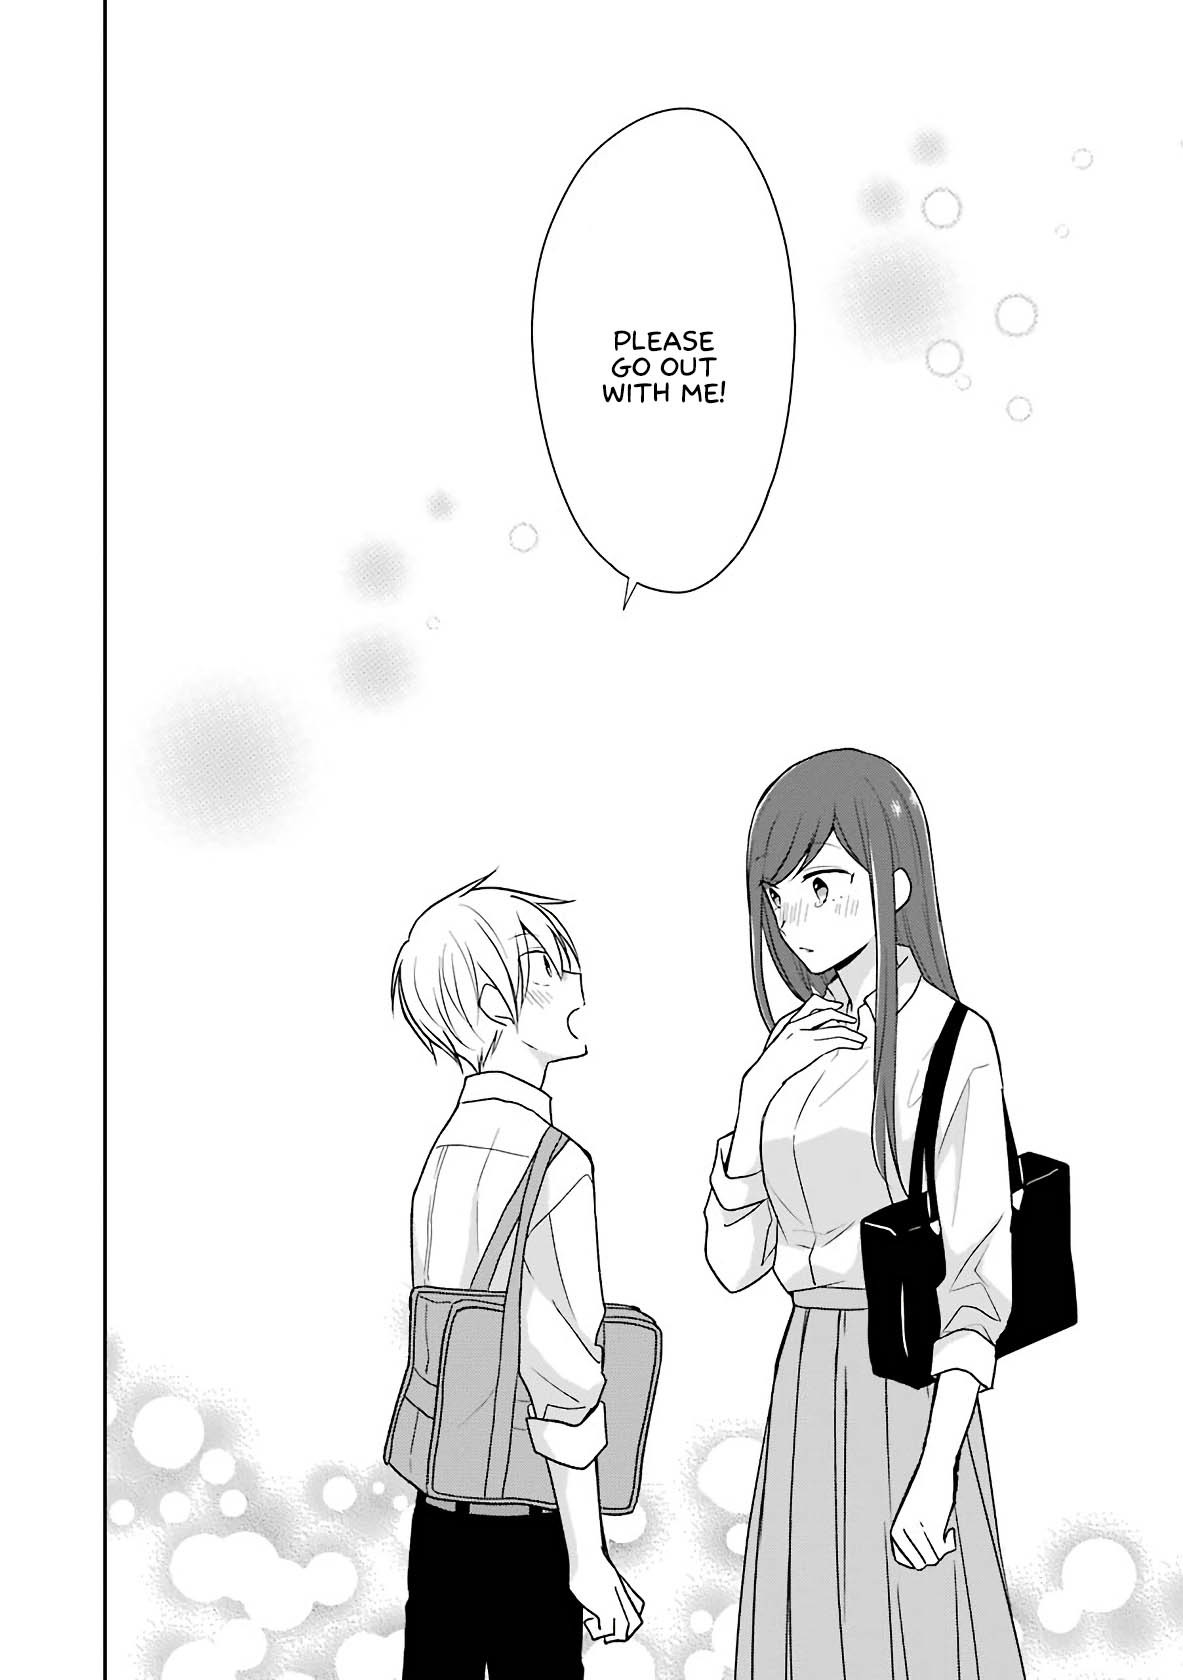 I'm Only 14 but I'll Make You Happy! vol.1 ch.5